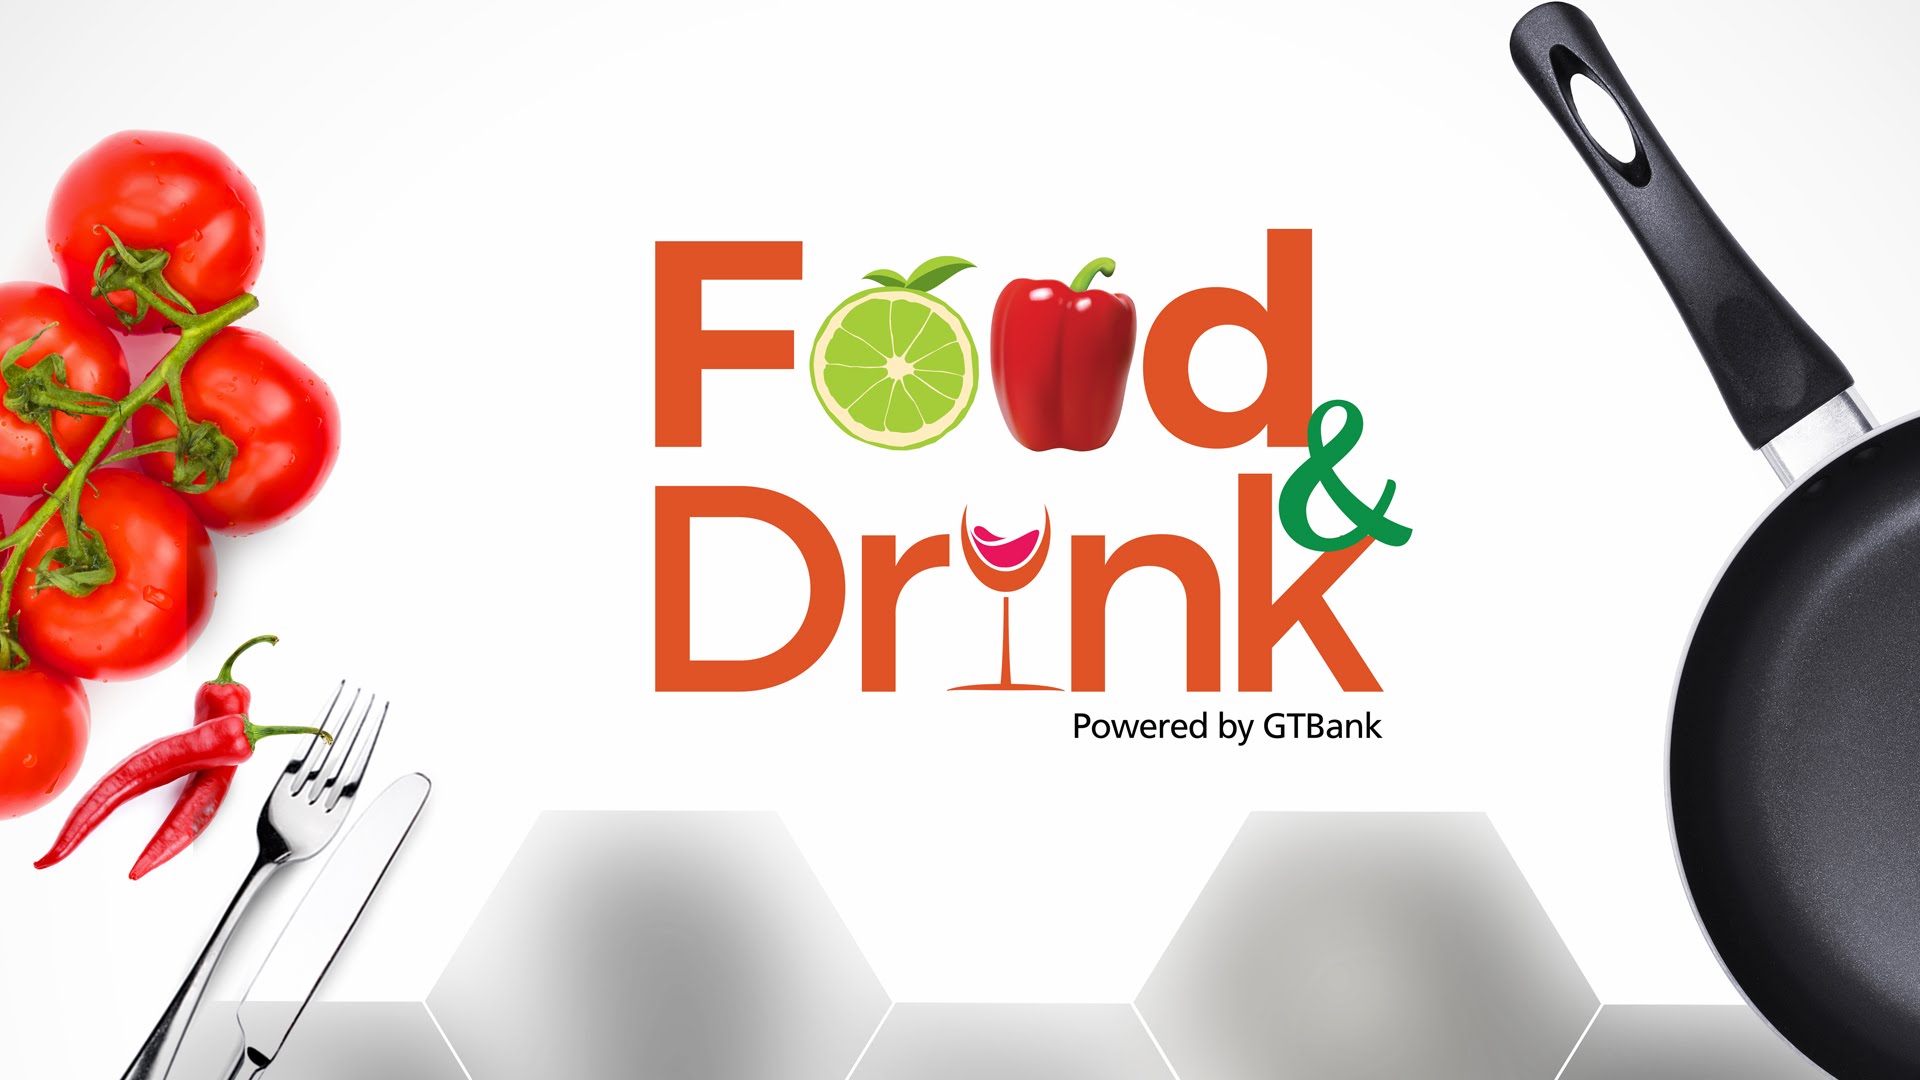 GTBank Holds Second Food and Drink Fair April 30